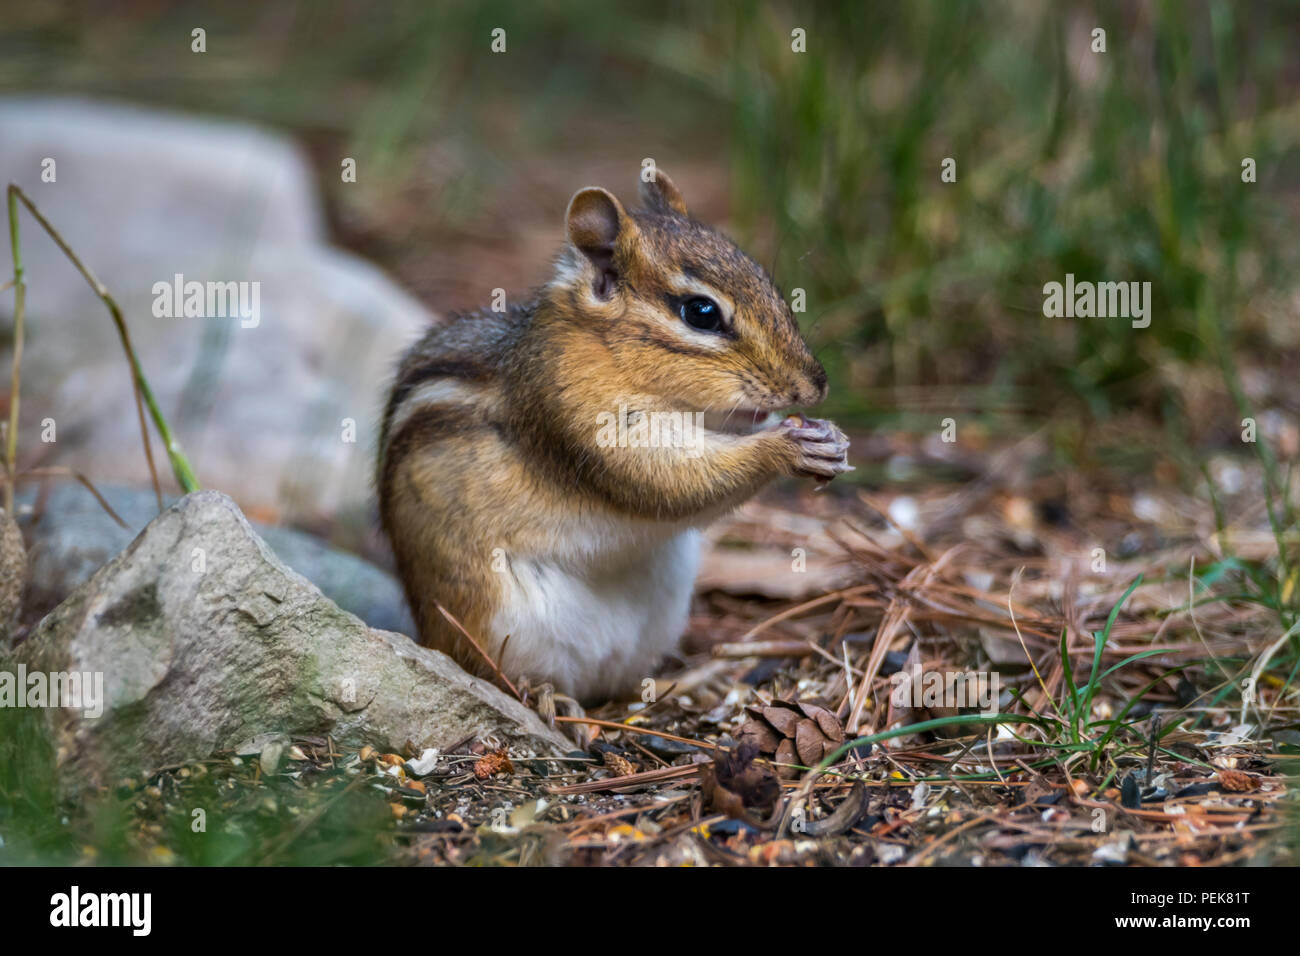 An Eastern Chipmunk (Tamias striatus) standing on hind feet and eating seeds. Stock Photo